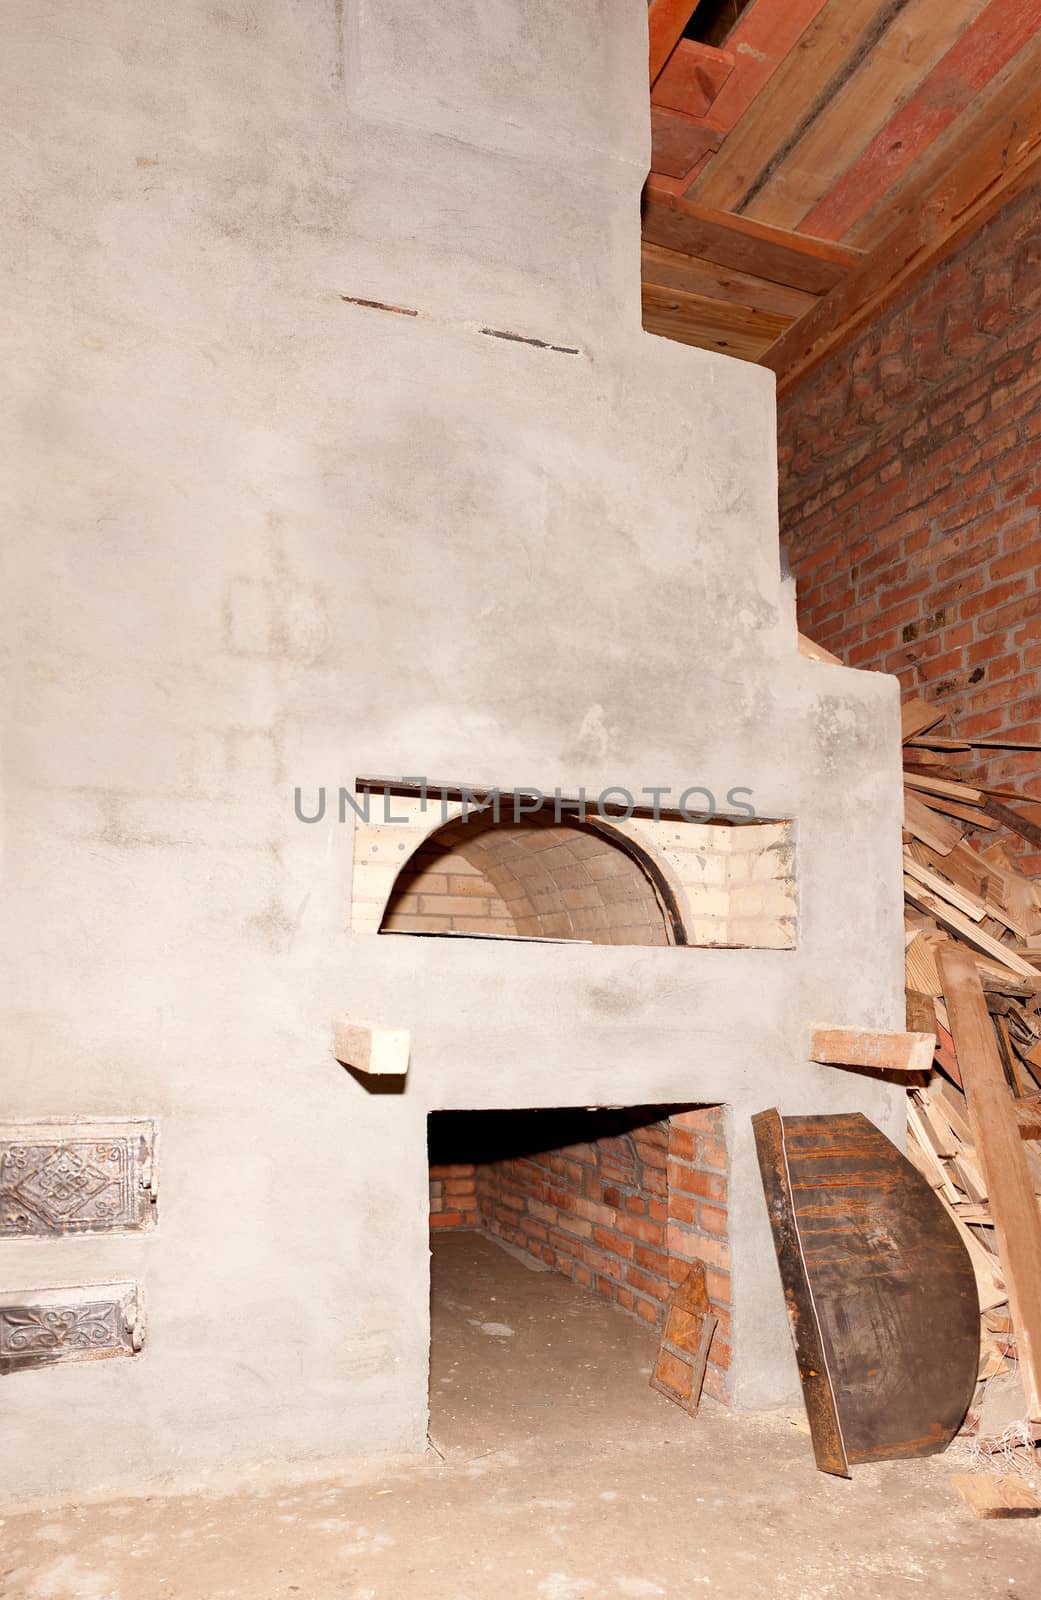 Construction of modern Russian oven in an apartment building